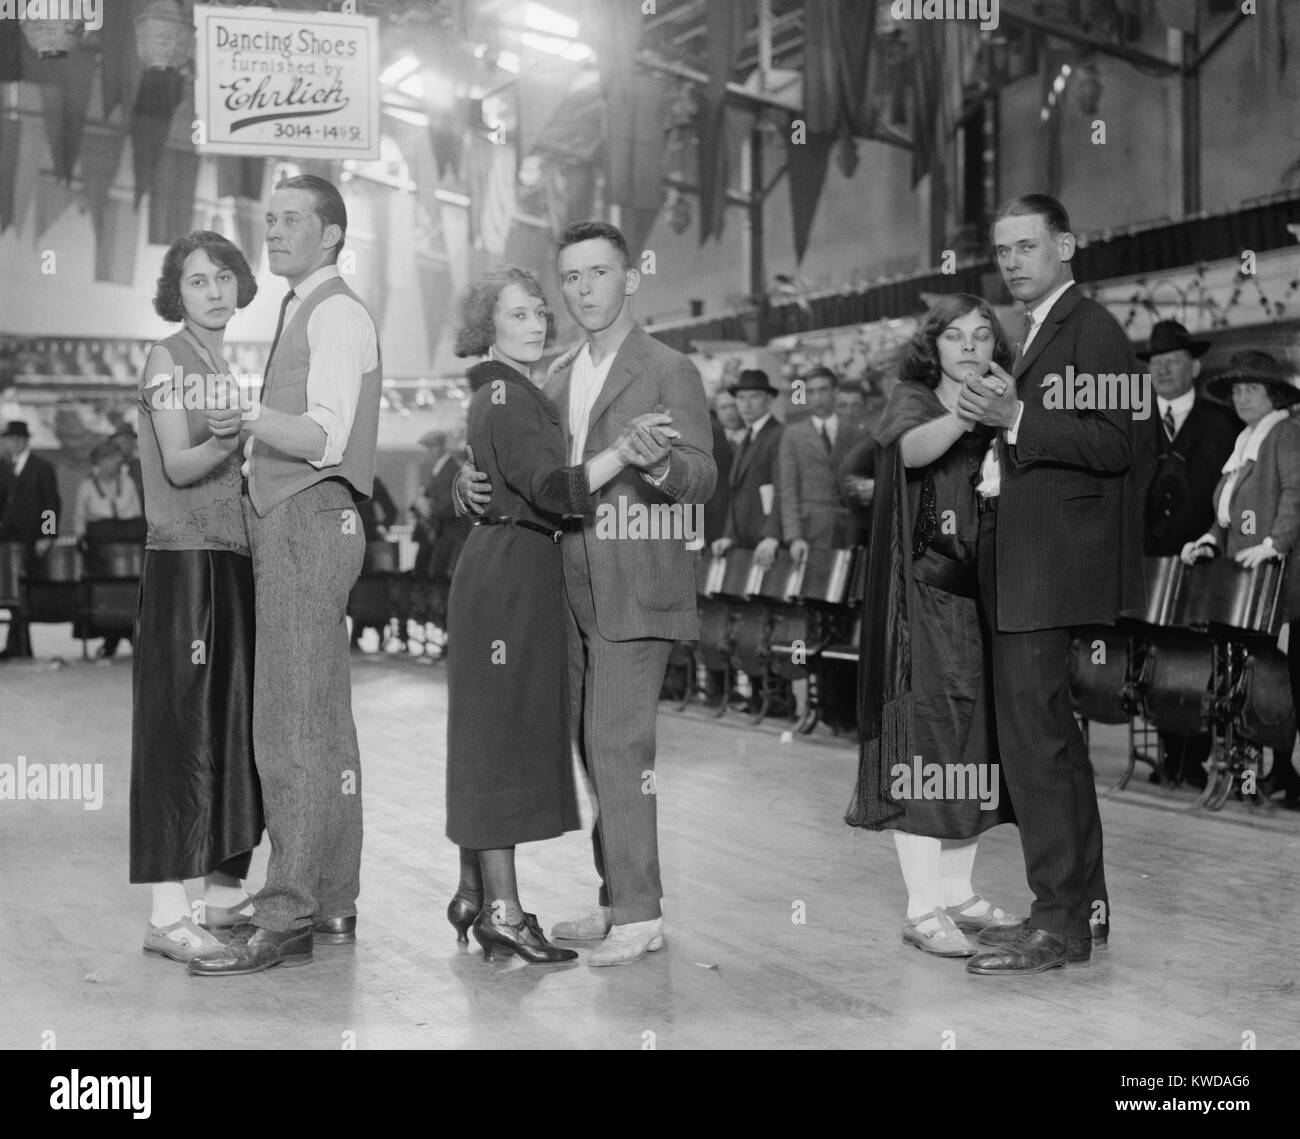 Three couples about to begin a round of Marathon dancing, April 20, 1923, in Washington, D.C. Above them is an advertisement, 'Dancing Shoes Furnished by Ehrlich' (BSLOC 2016 8 97) Stock Photo